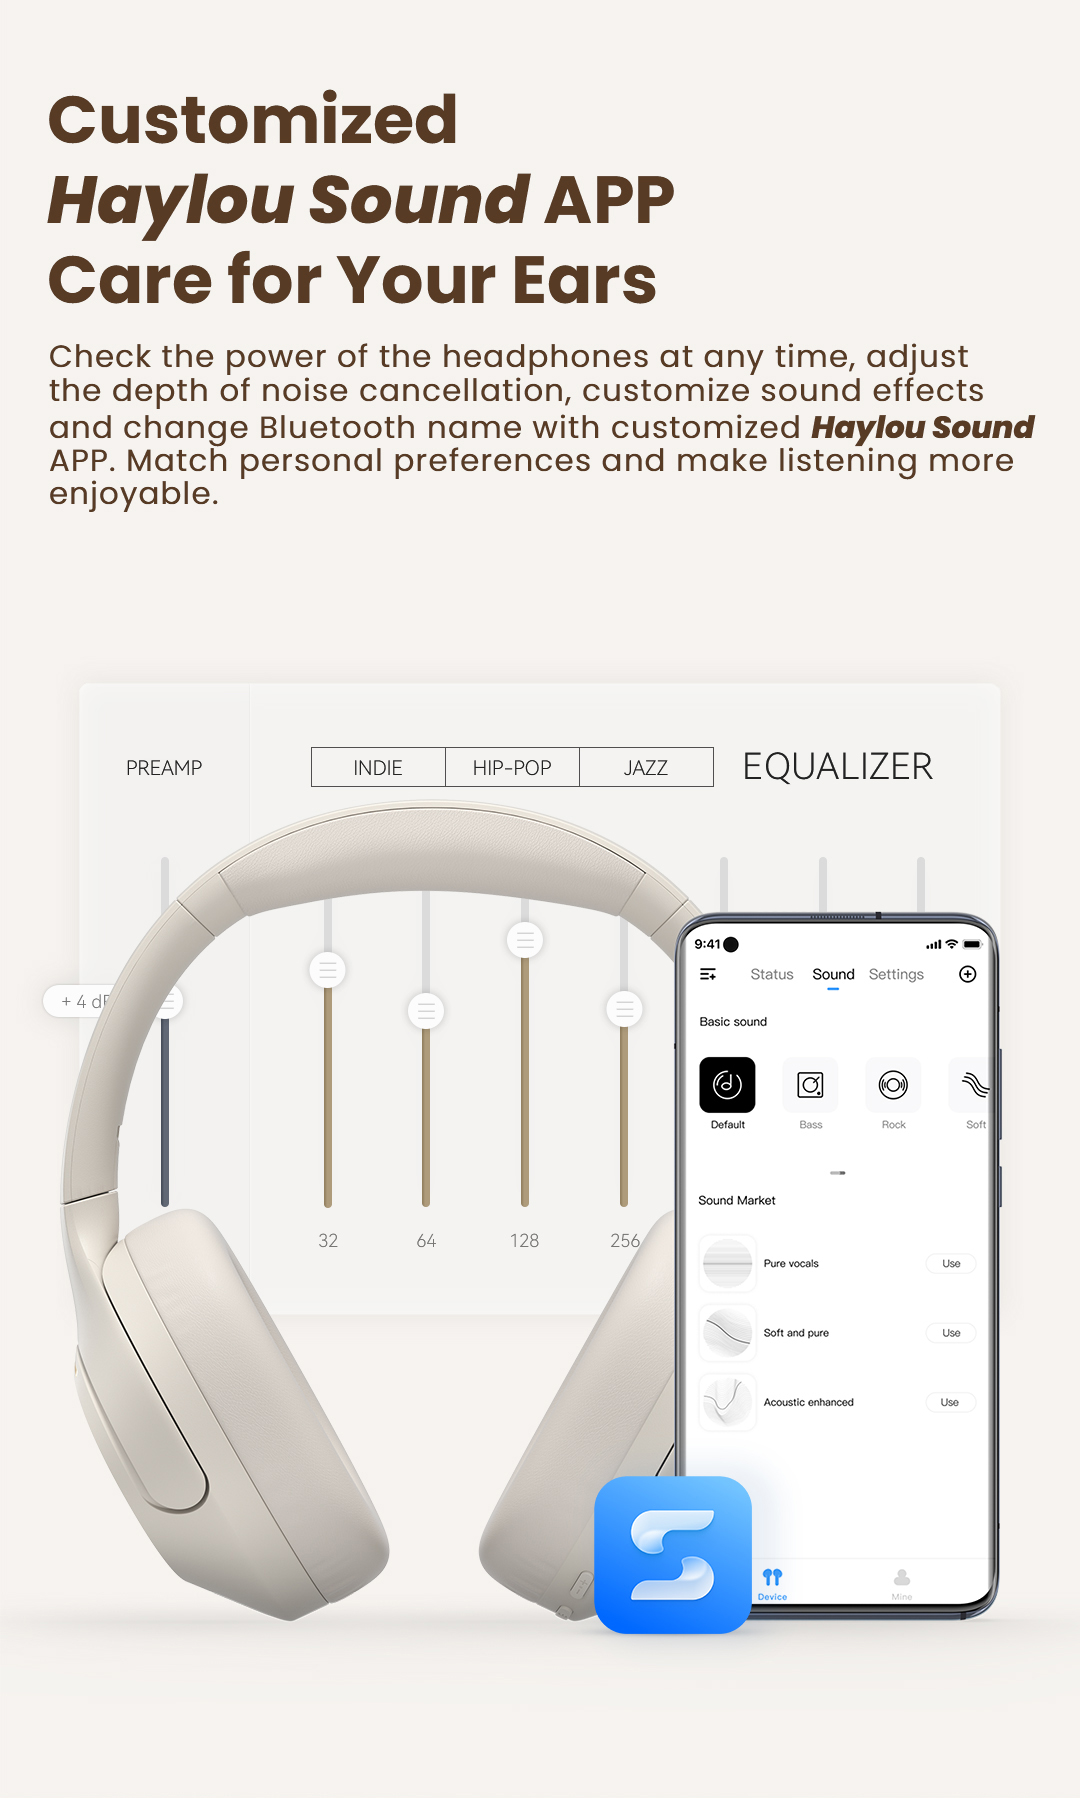 Haylou S35 ANC bluetooth 5.2 Headphone Wireless Headset 42dB Noise Cancellation 40mm Driver 60H Playtime Over-ear Headphones with Mic